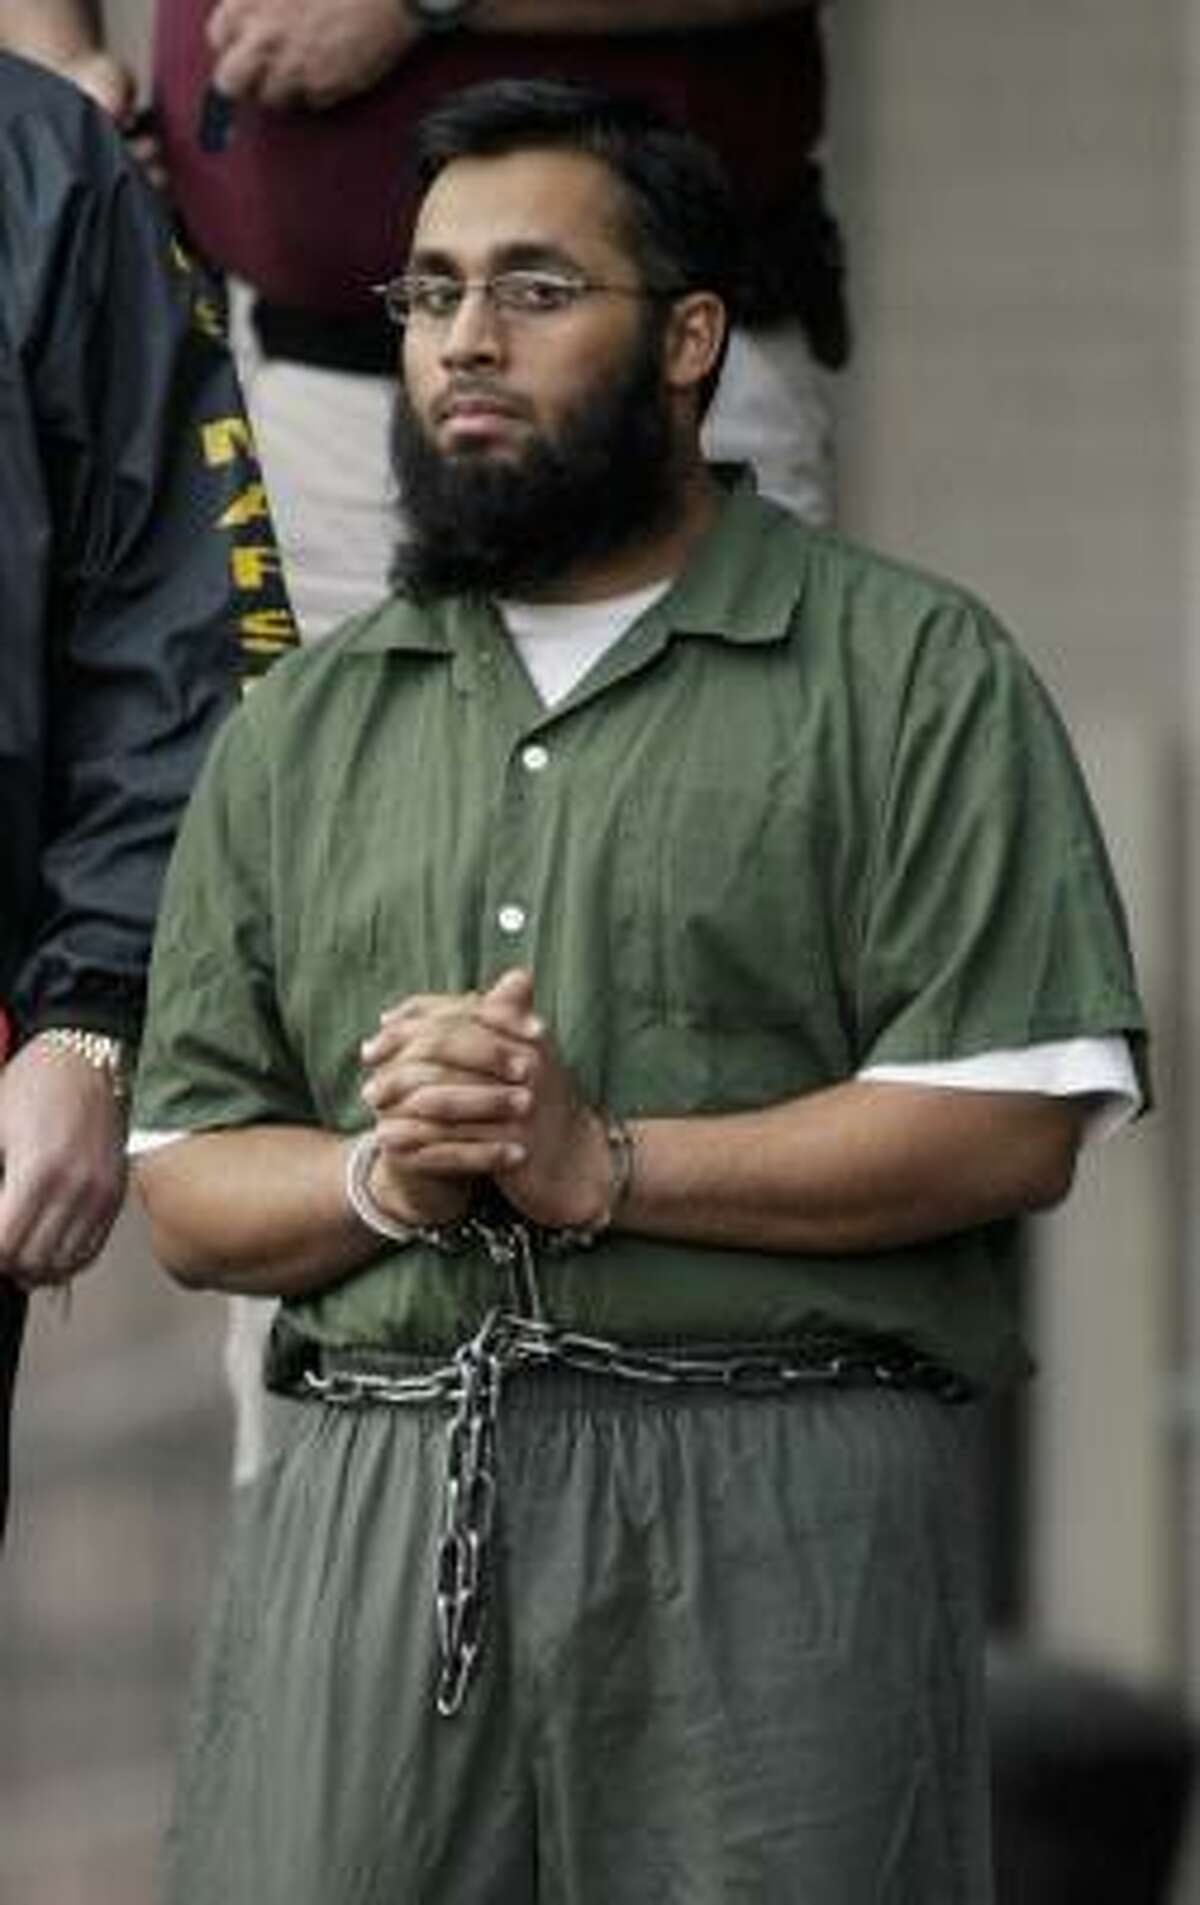 Shiraz Syed Qazi, shown outside court in November 2006, attended Houston Community College on a student visa.